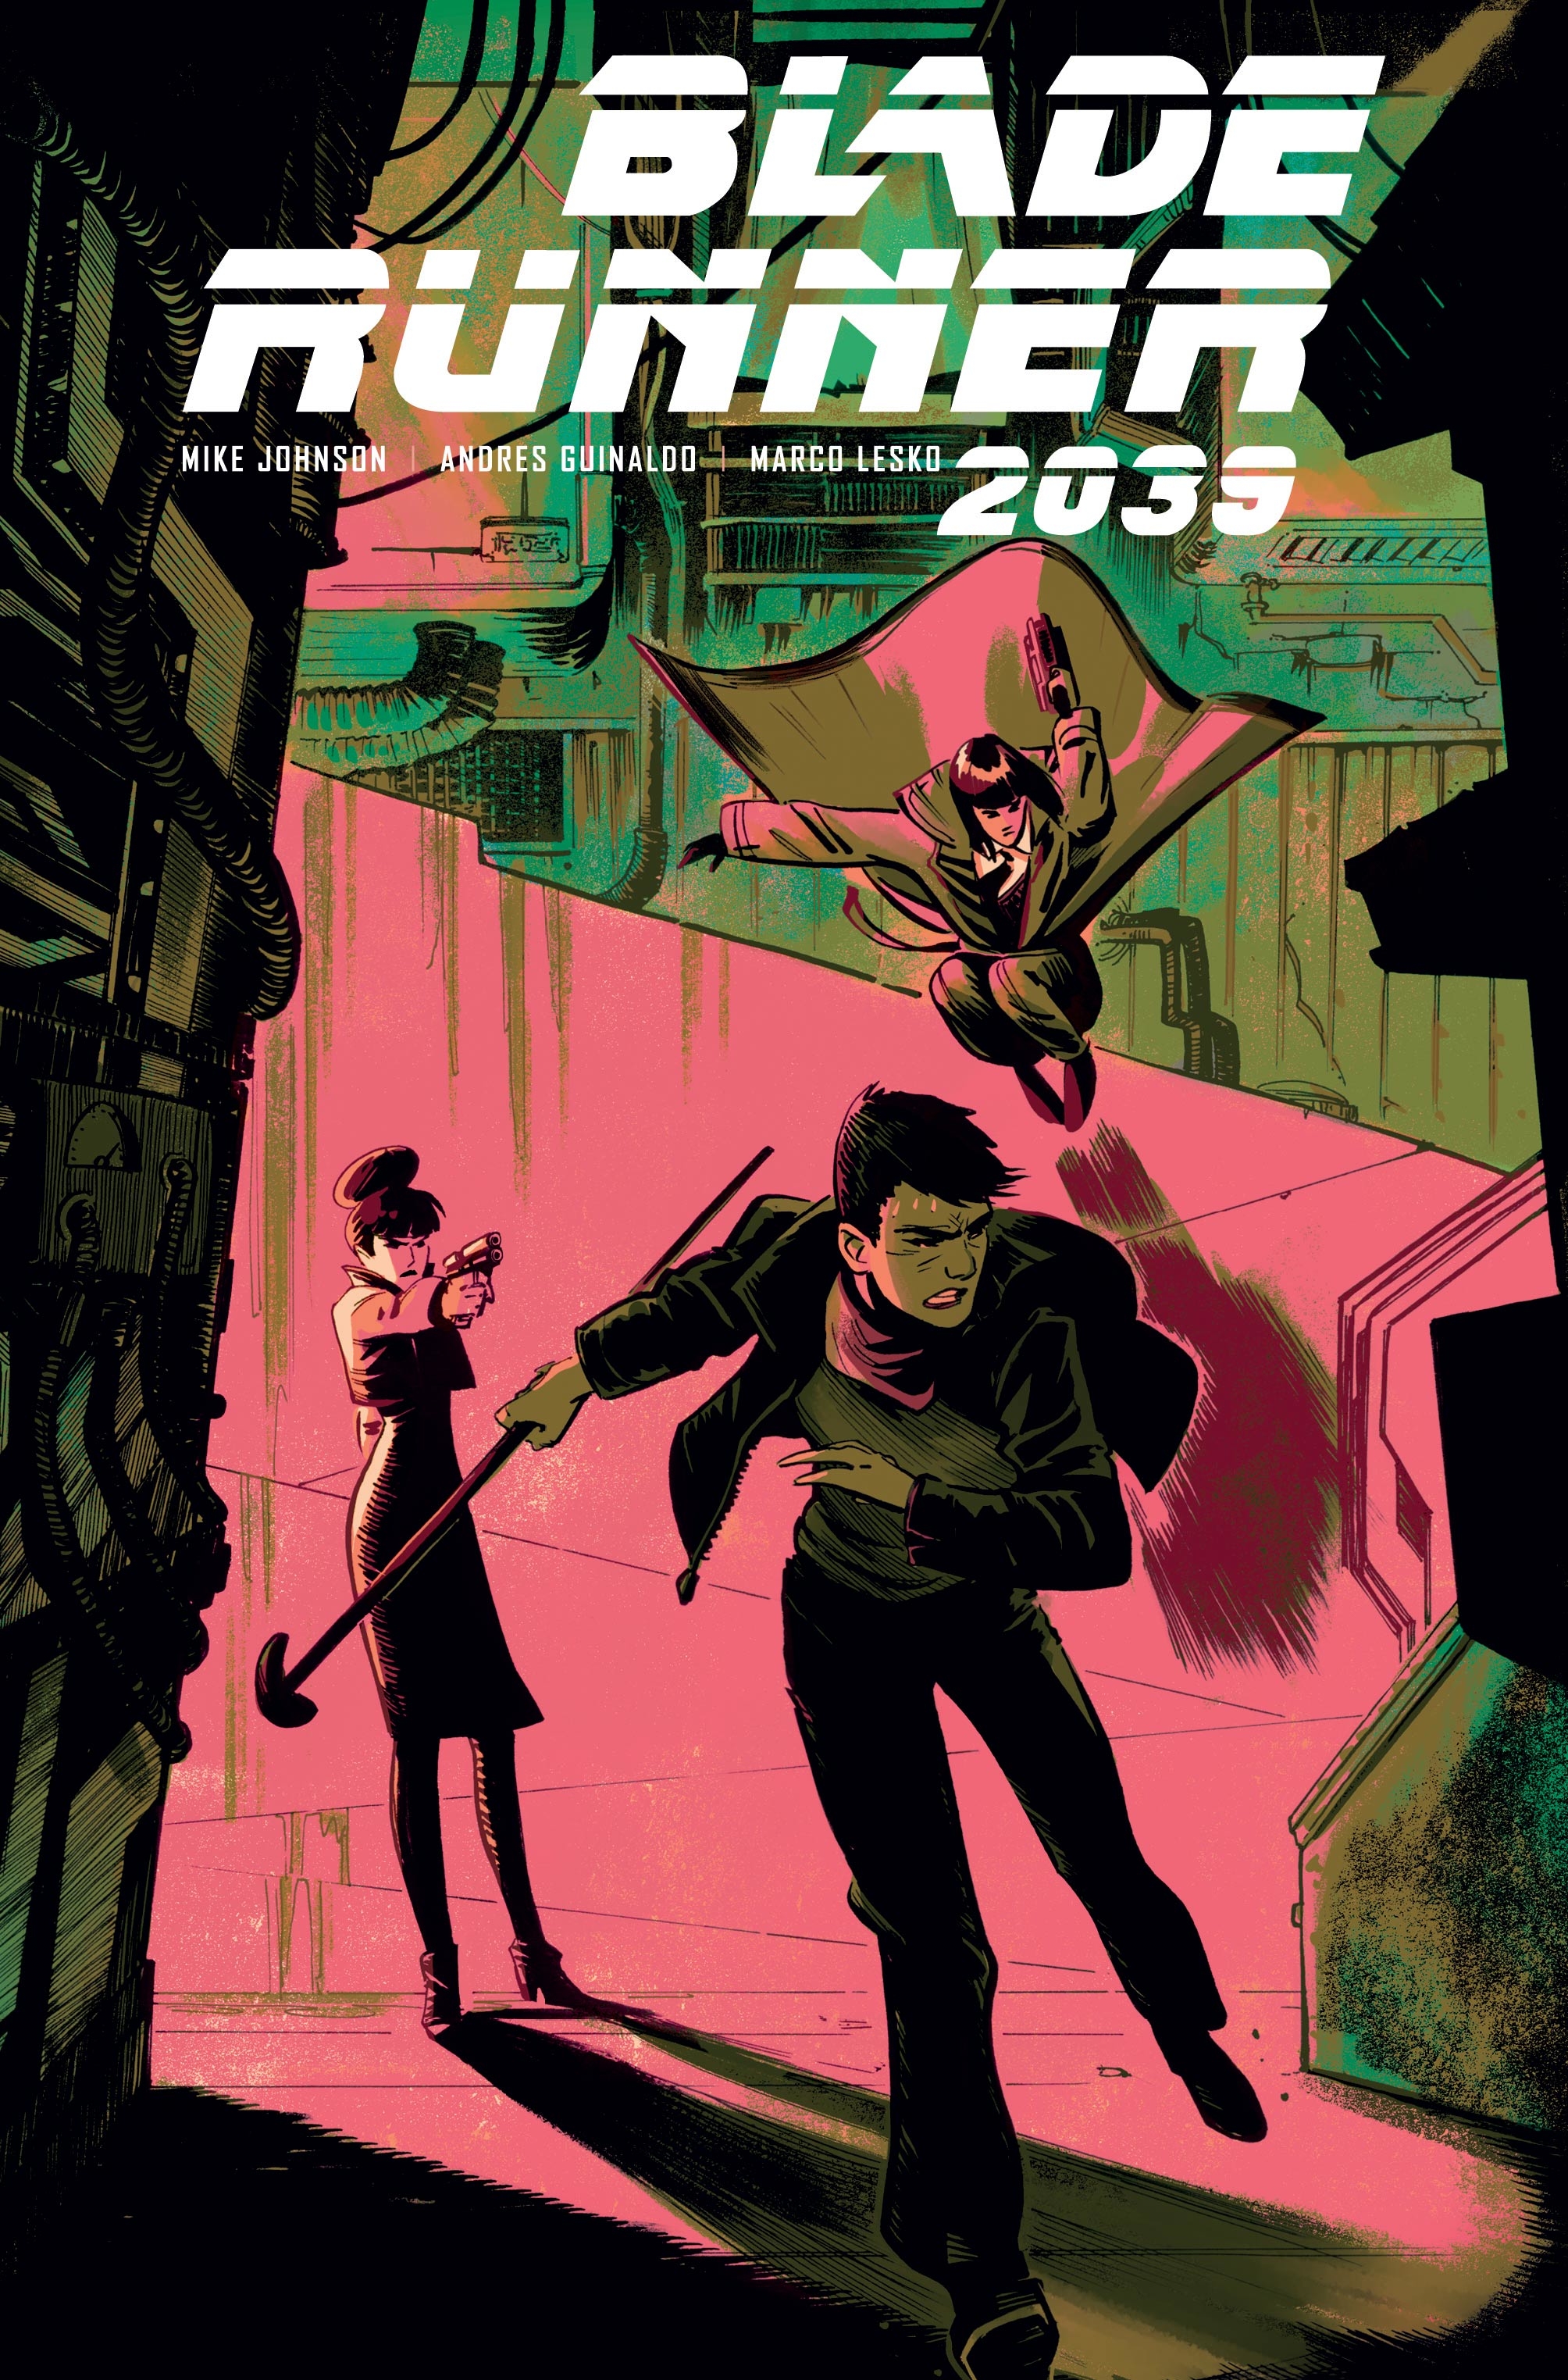 Blade Runner 2039 #9 Cover D Fish (Of 12) (Mature)